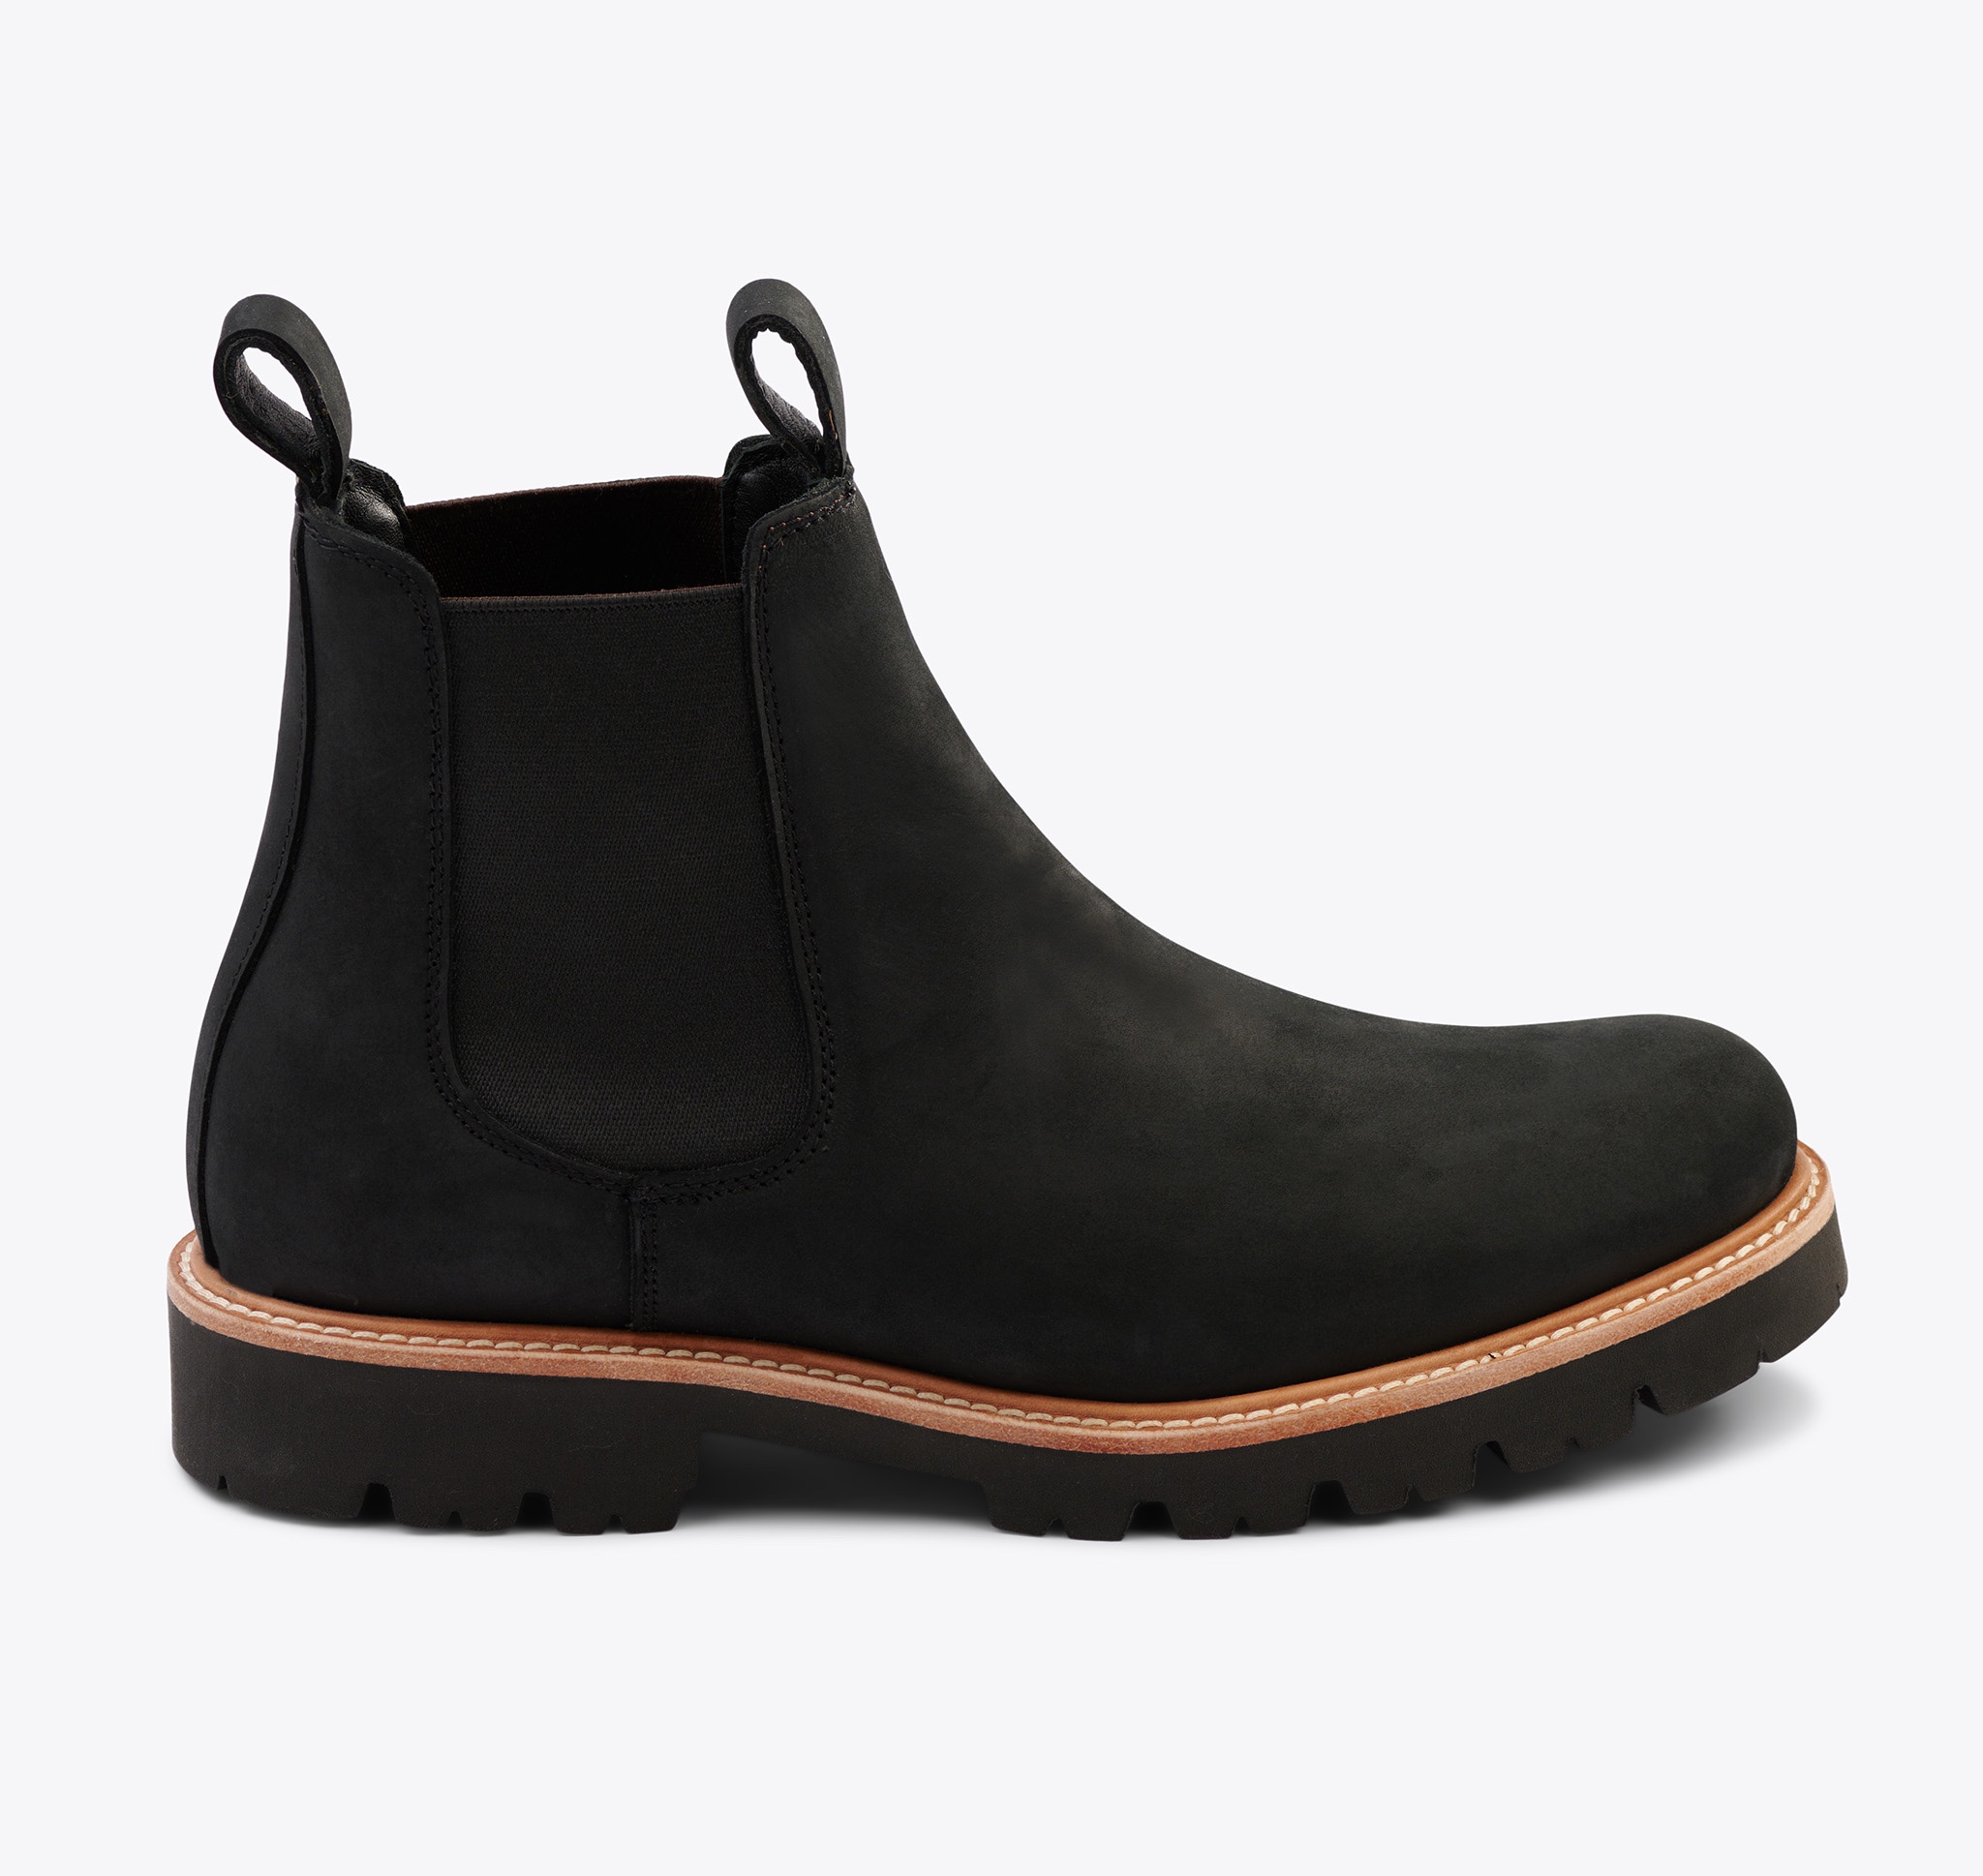 Nisolo Go-To Lug Chelsea Boot Black - Every Nisolo product is built on the foundation of comfort, function, and design. 